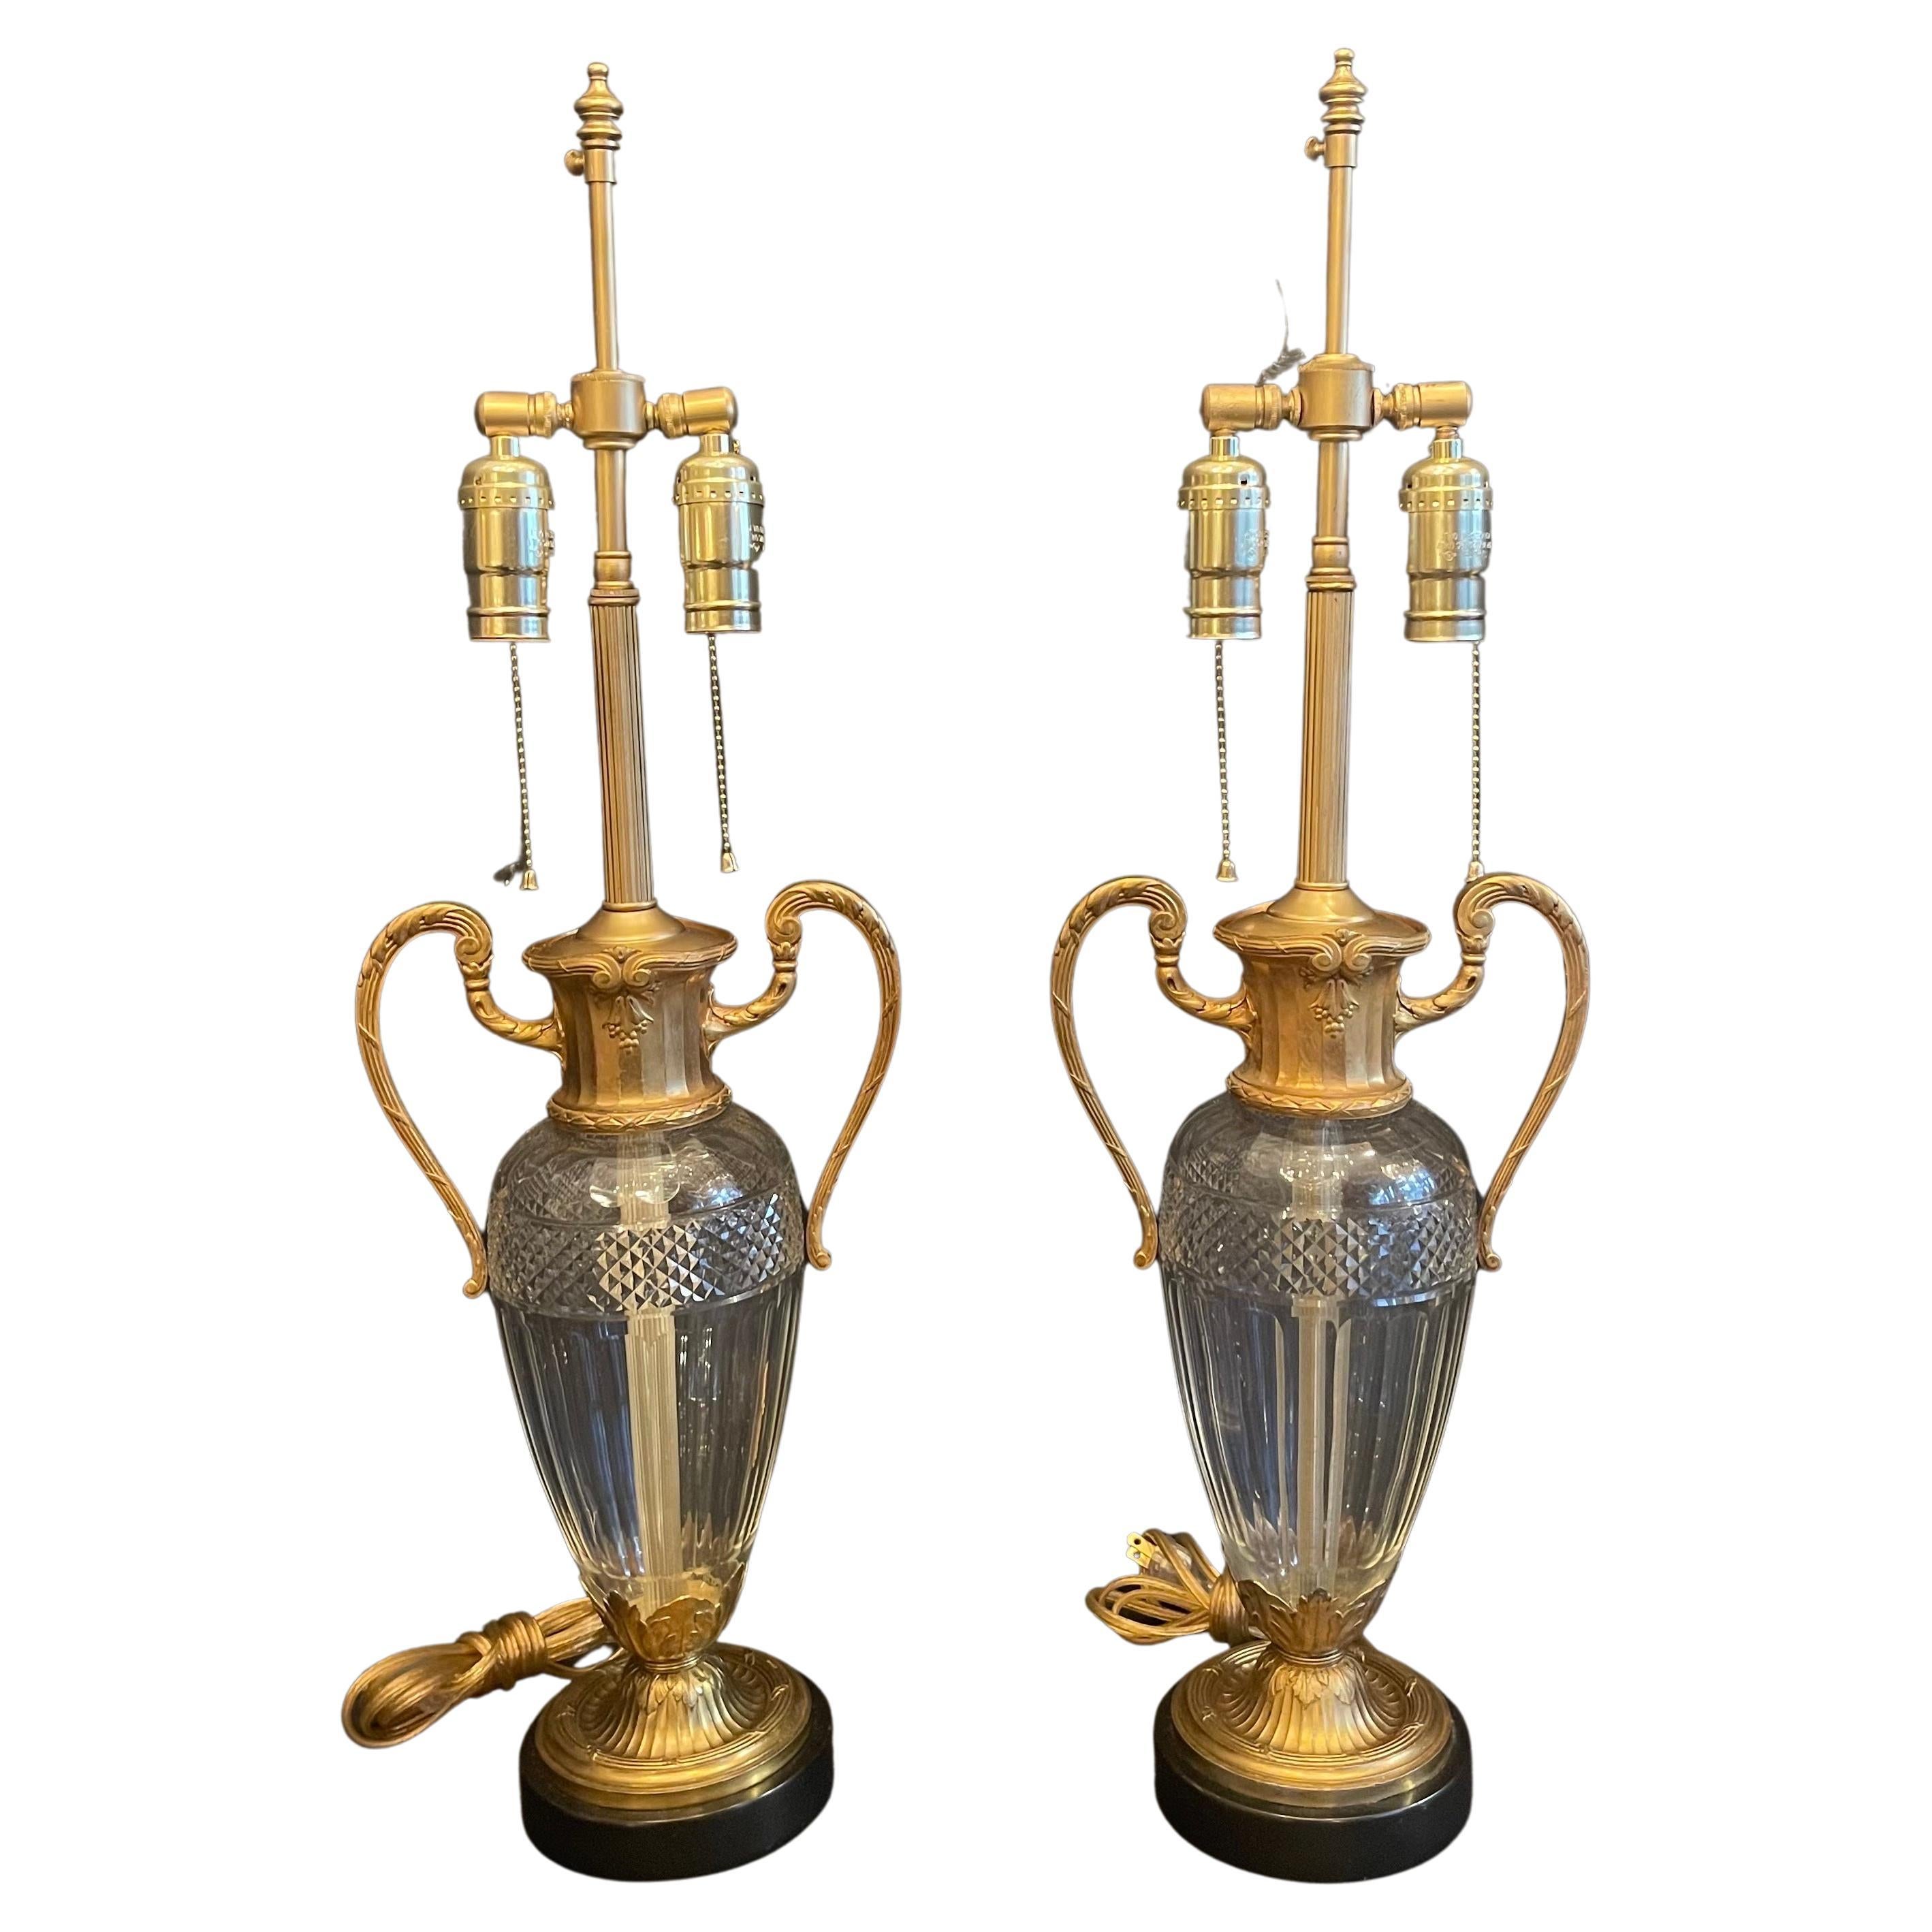 Wonderful Pair French Gilt Dore Bronze Cut Crystal Urn Form Ormolu-Mounted Lamps For Sale